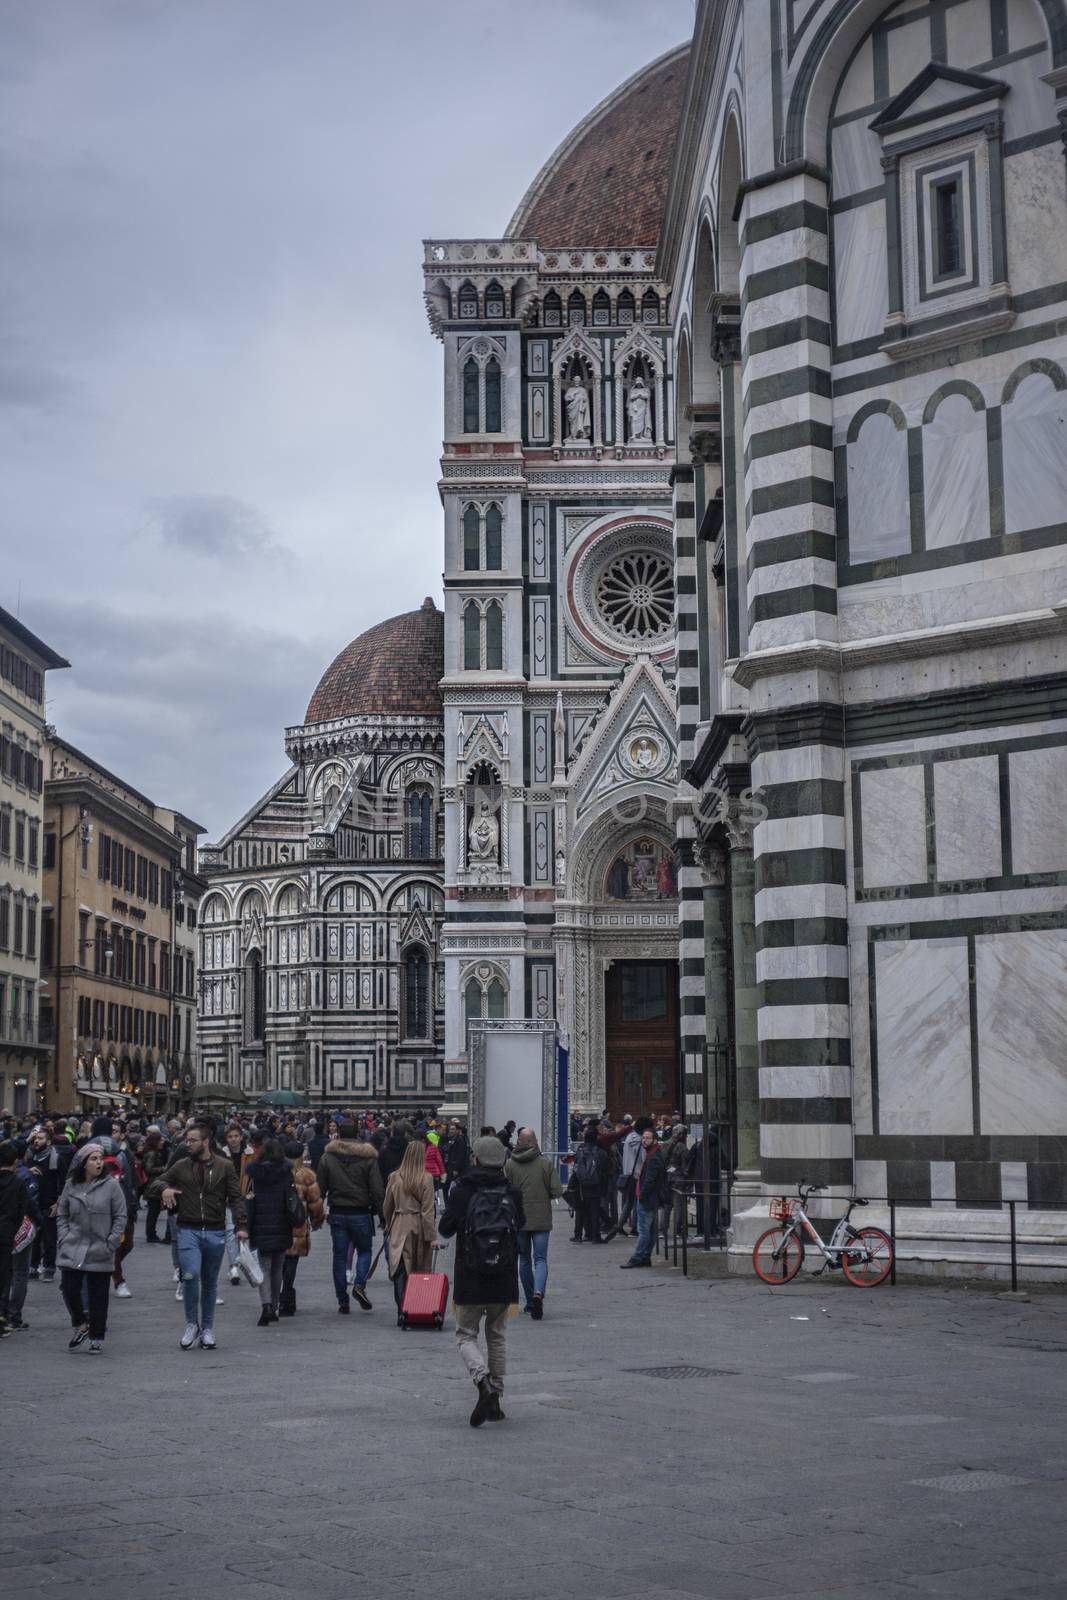 Detail of the Cathedral of Florence taken on a cloudy day with the light that enhances the colors